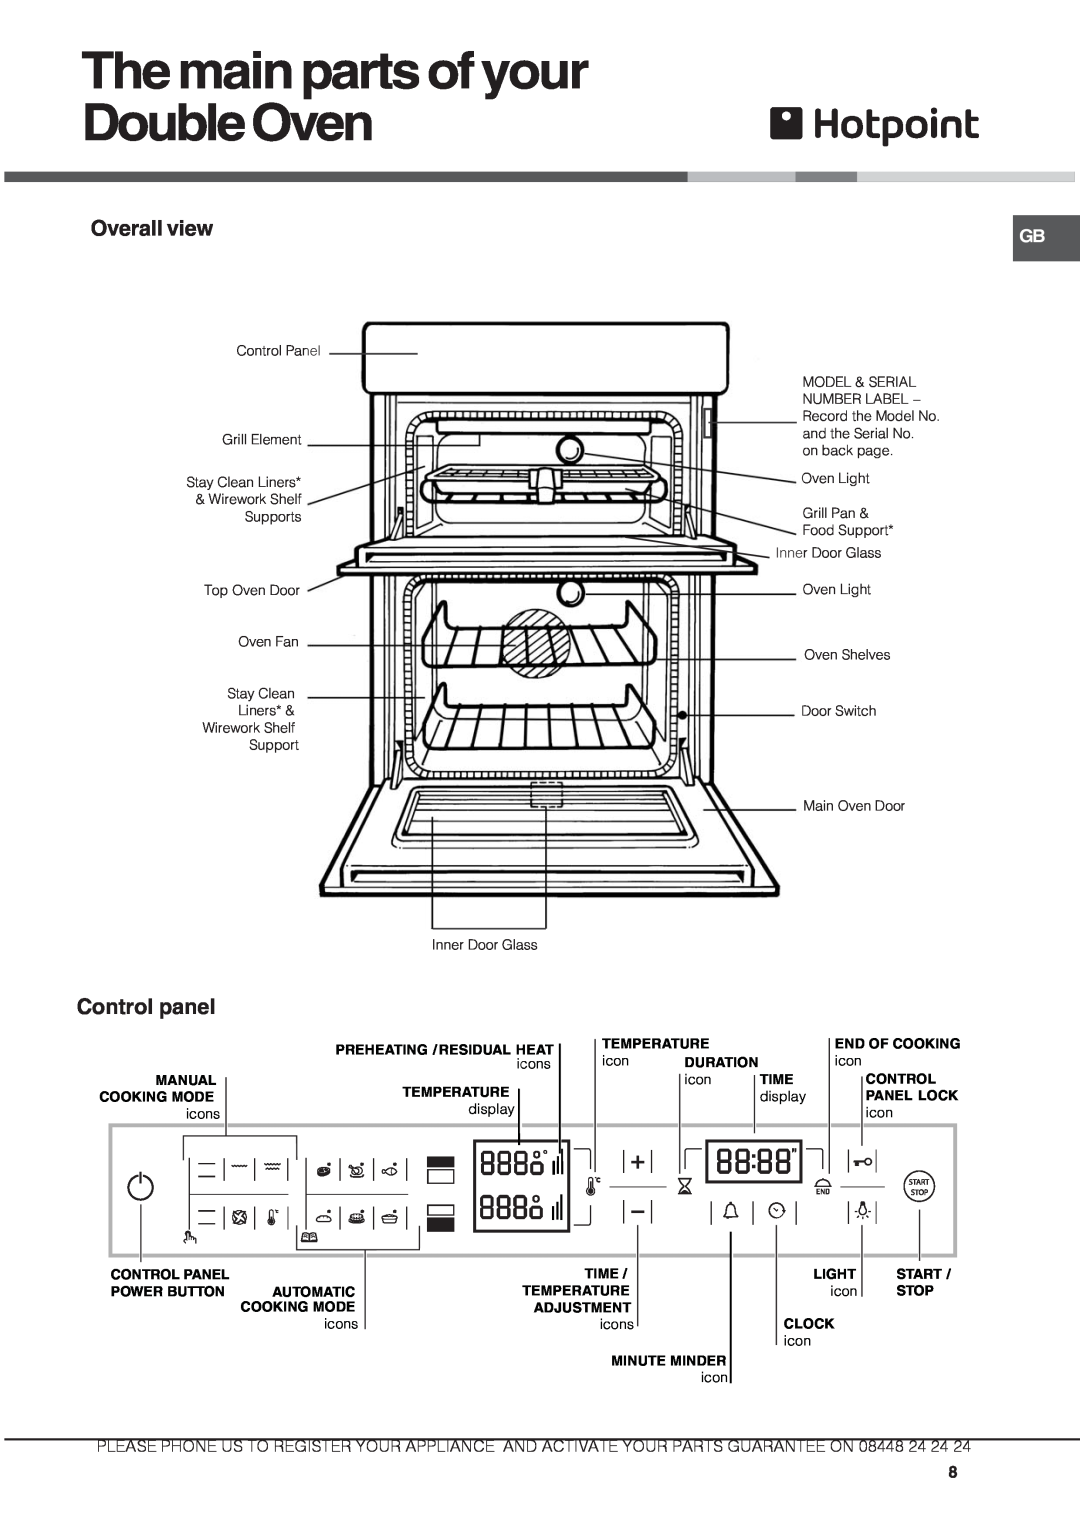 Hotpoint DX 1032 CX manual The main parts of your DoubleOven, Overall view, Control panel, icons, display 